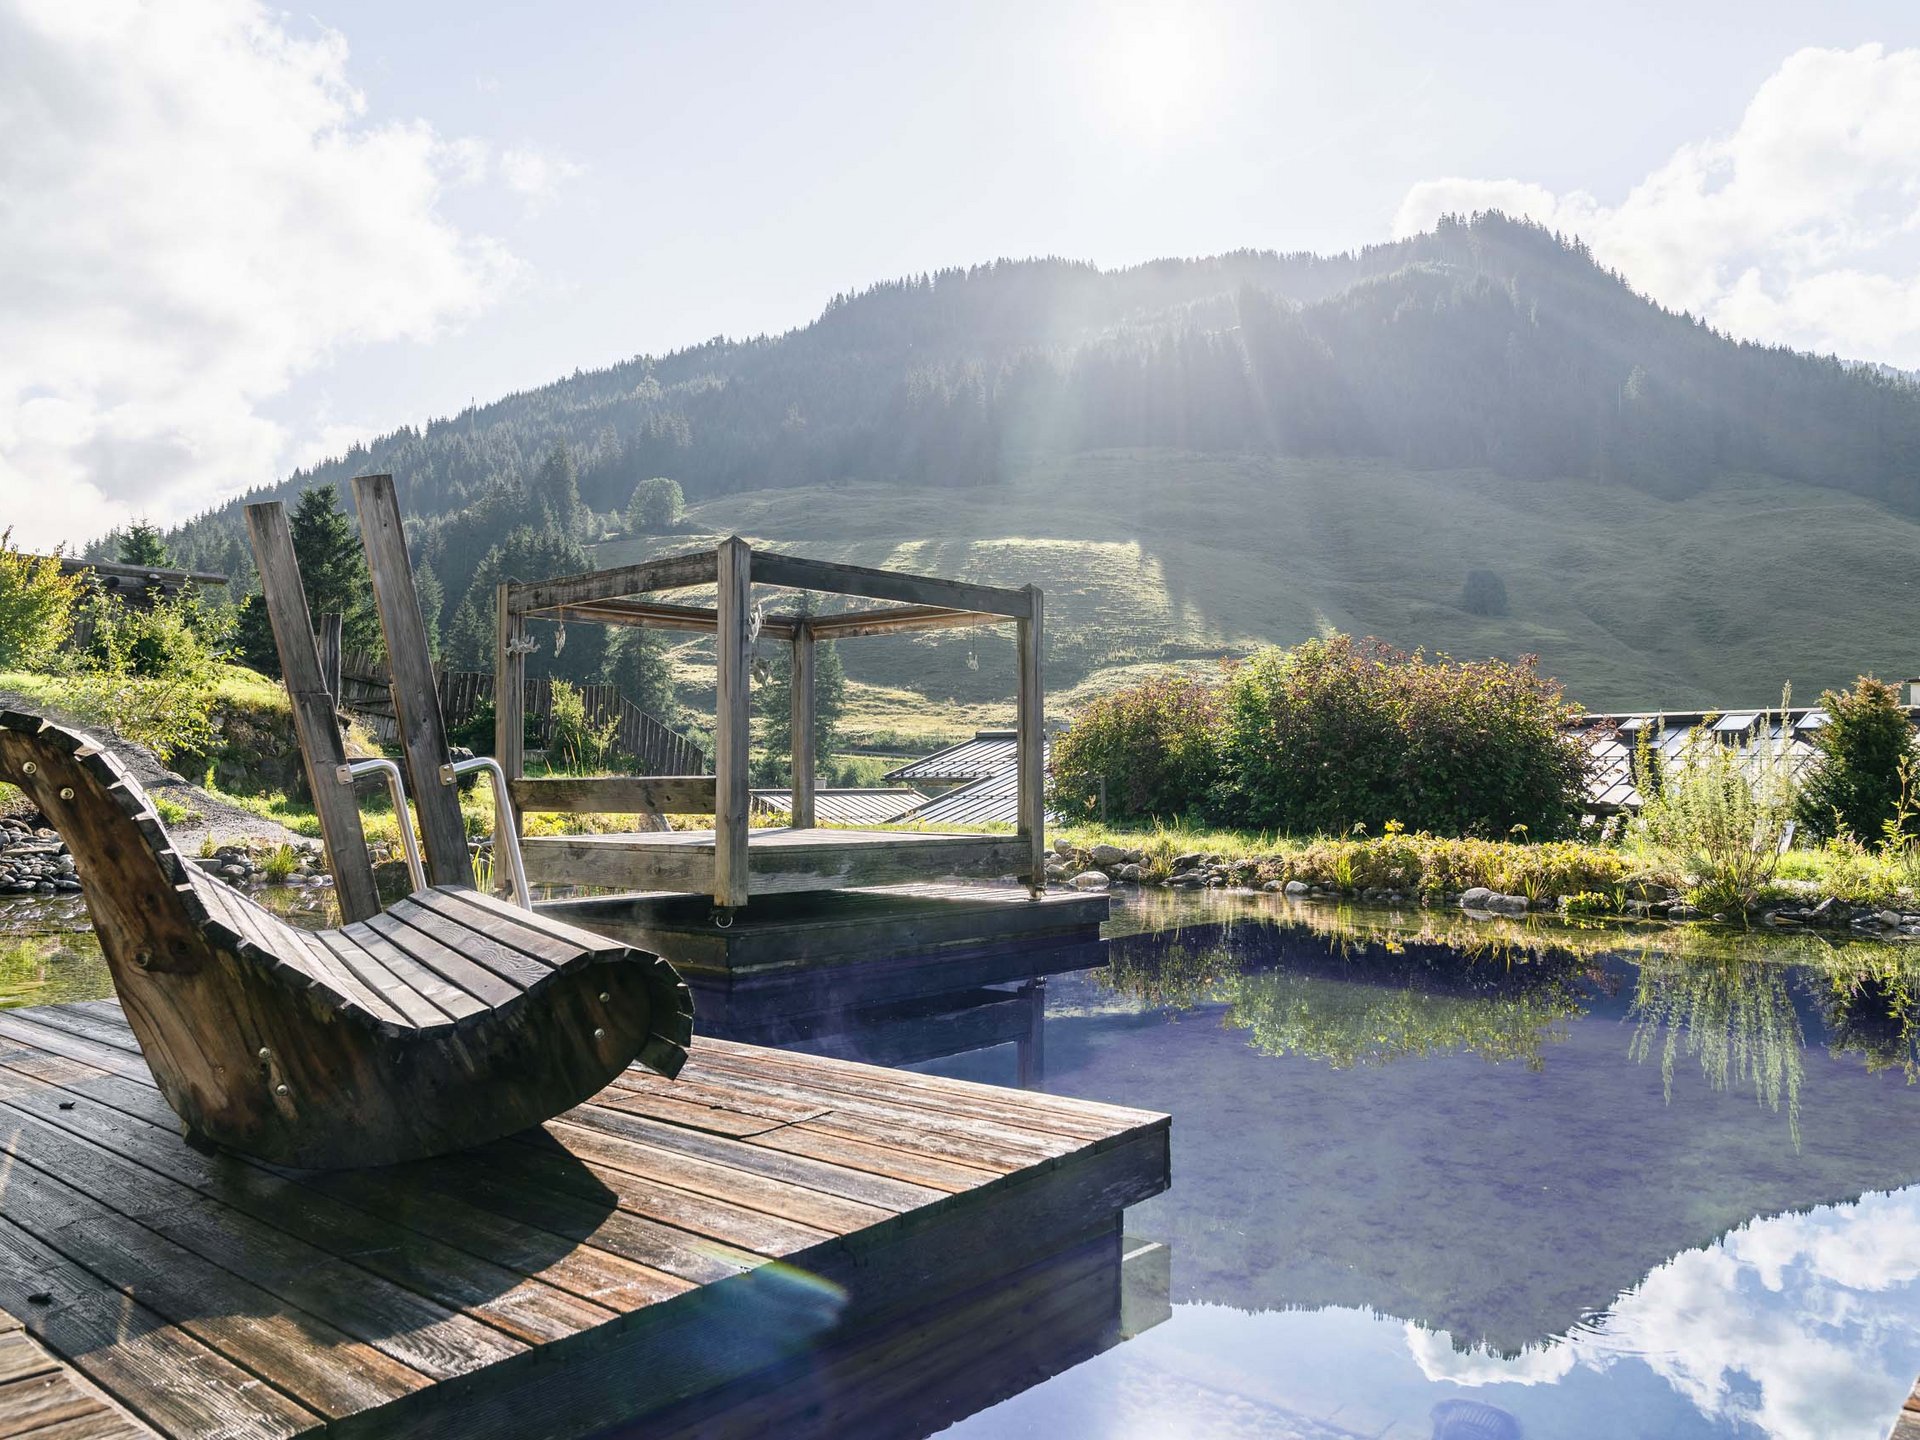 Der Grubacher • The best choice among the eco hotels in Tyrol